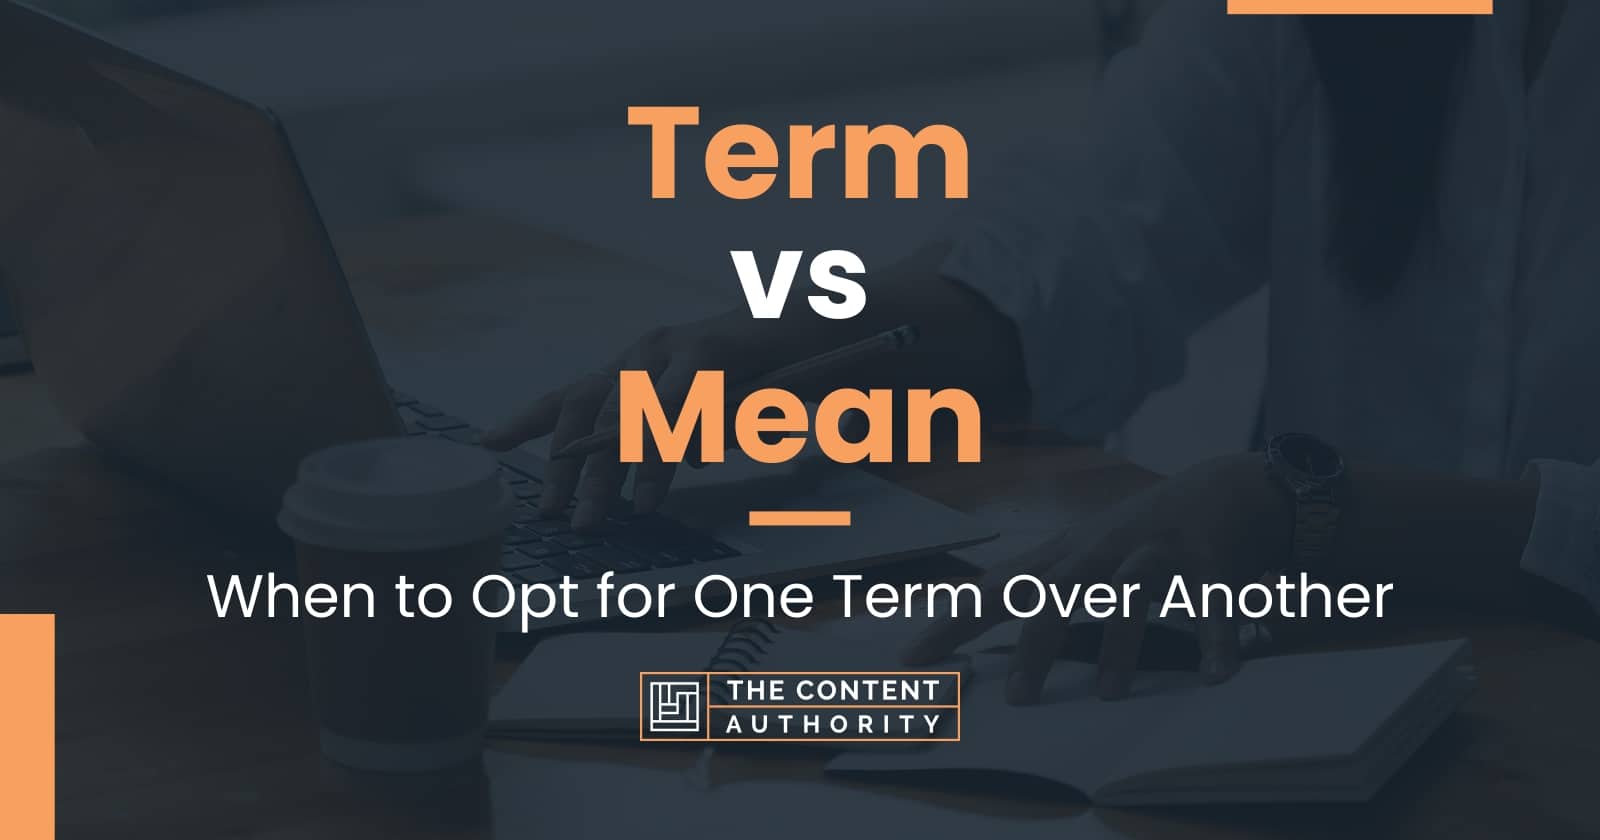 Term vs Mean: When to Opt for One Term Over Another